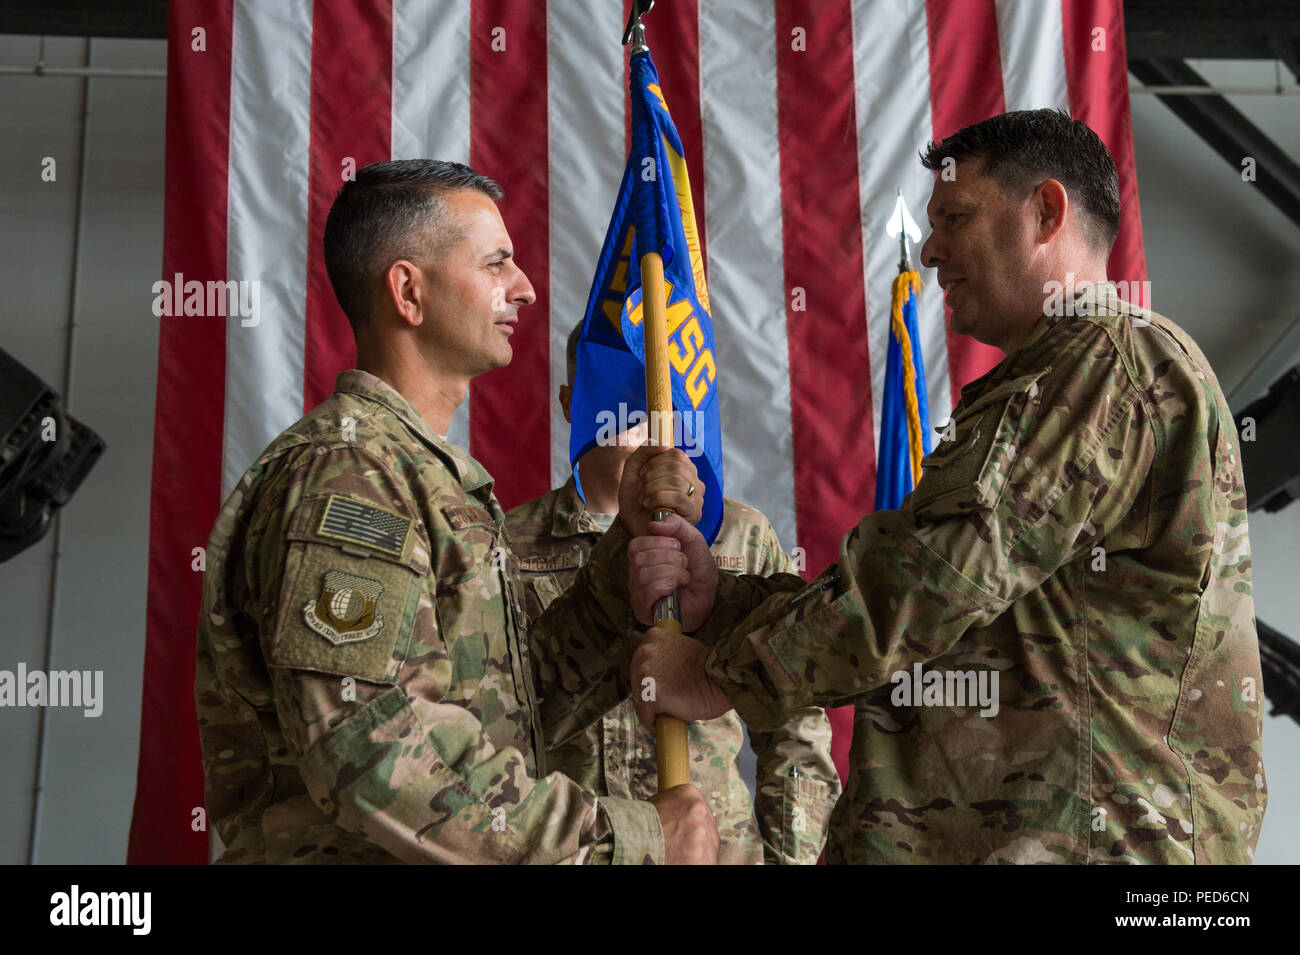 U.S. Air Force Brig. Gen. Dave Julazadeh, 455th Air Expeditionary Wing commander, hands the guidon to Col. William Clark, 455th Expeditionary Mission Support Group incoming commander, during the 455th EMSG change of command ceremony at Bagram Air Field, Afghanistan, Aug. 3, 2015. The 455th MSG is comprised of five squadrons responsible for communications, civil engineer operations, force support, logistics readiness, and security forces. (U.S. Air Force photo by Tech. Sgt. Joseph Swafford/Released) Stock Photo